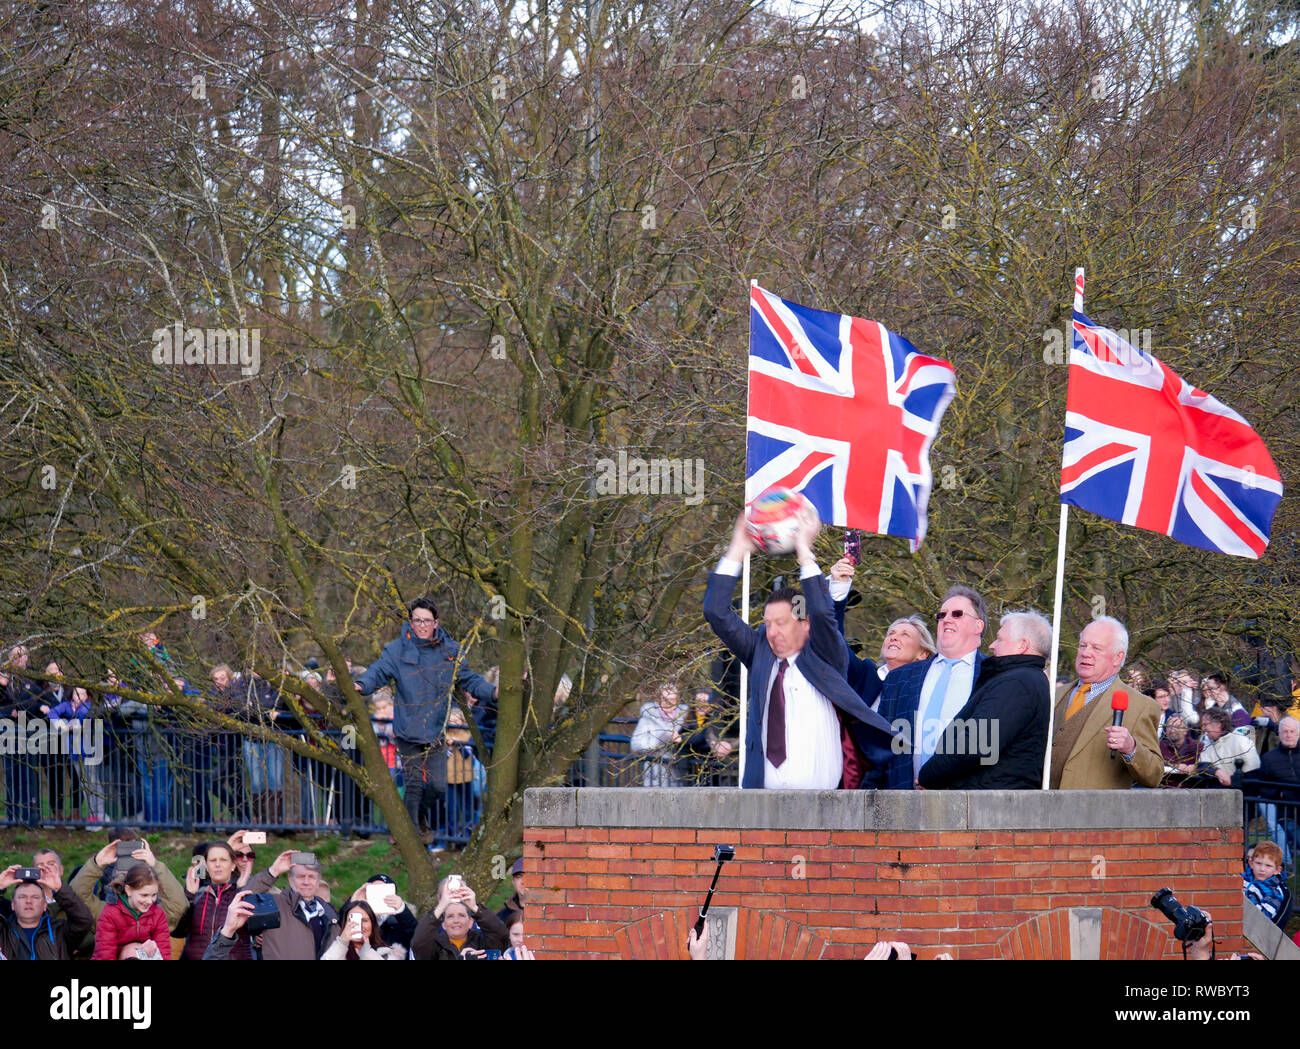 Ashbourne Derbyshire, UK. 5th Mar, 2019. Ashbourne Royal Shrovetide Football match on Shrove Tuesday. Ye Olde & Ancient Medieval hugball game is the forerunner to football. It's played between two teams, the Up'Ards & Down'Ards separated by the Henmore Brook river. The goals are 3 miles apart at Sturston Mill & Clifton Mill. Charles Cotton's poem Burlesque upon the Great Frost, dating from 1683, mentions this game at Ashbourne. He was the cousin of Aston Cockayne Baronet of Ashbourne, Derbyshire. Credit: Doug Blane/Alamy Live News Stock Photo